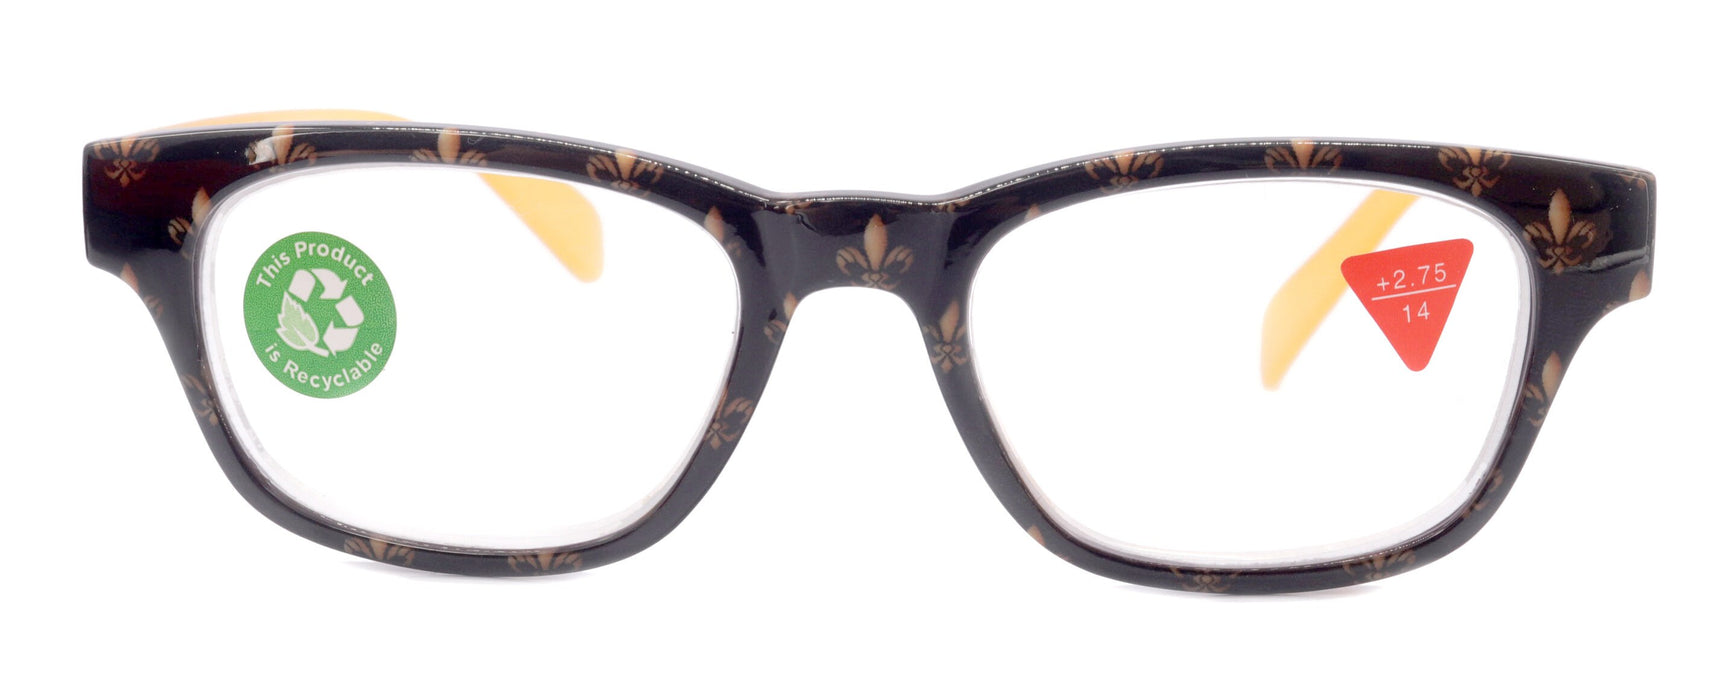 Lilly, (Premium) Reading Glasses (Fleur De Lis) +1 .. +3 Magnifying, Fashion Square Optical Frame. (Yellow, Gold, Black) NY Fifth Avenue.